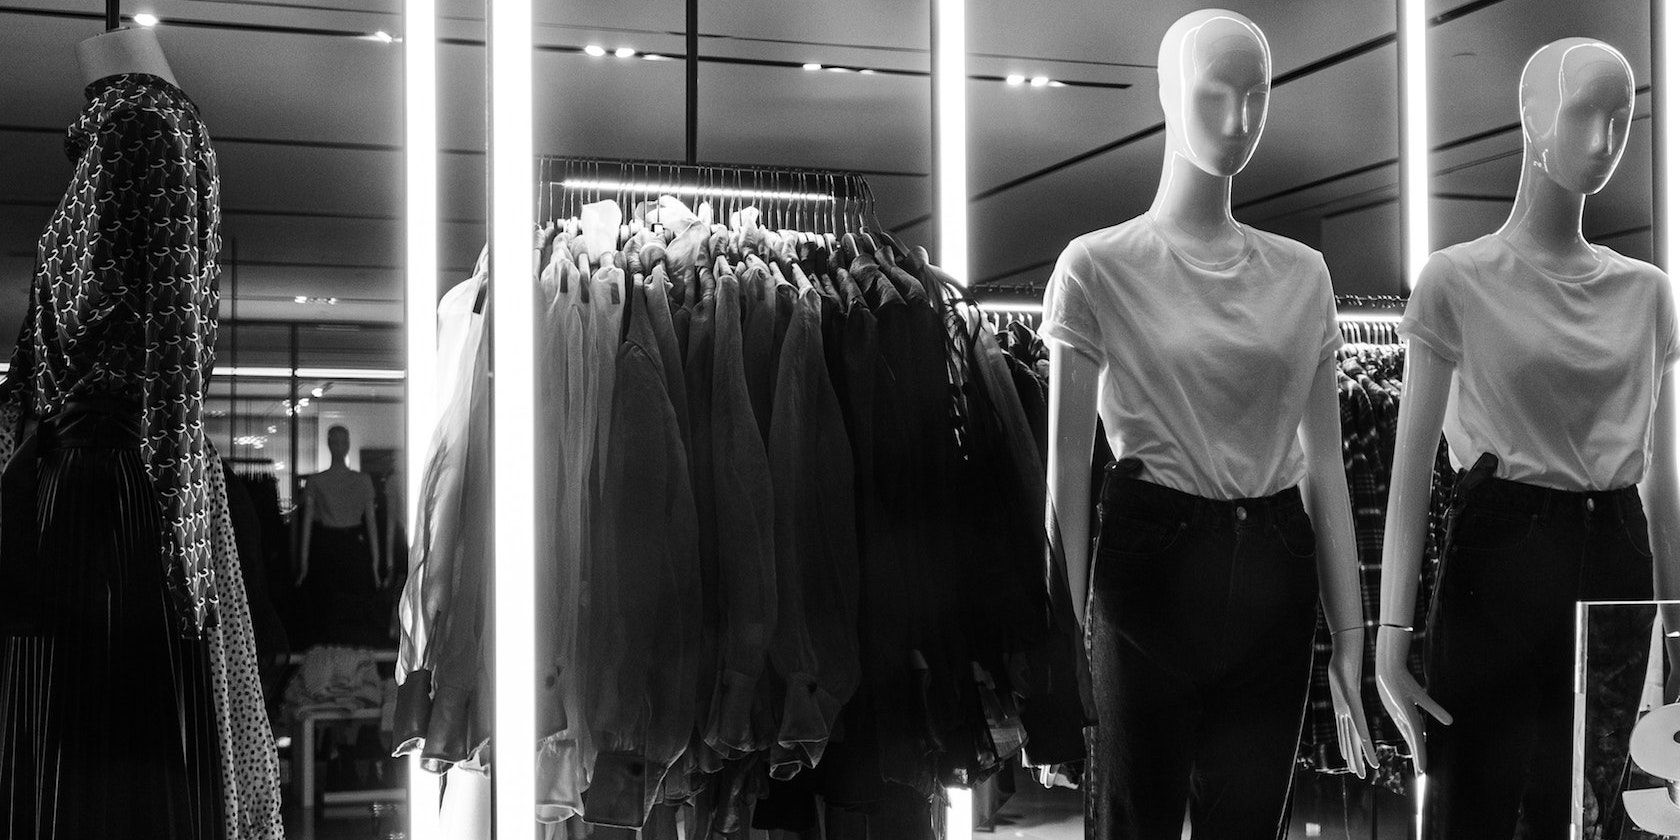 Clothing shop black and white.